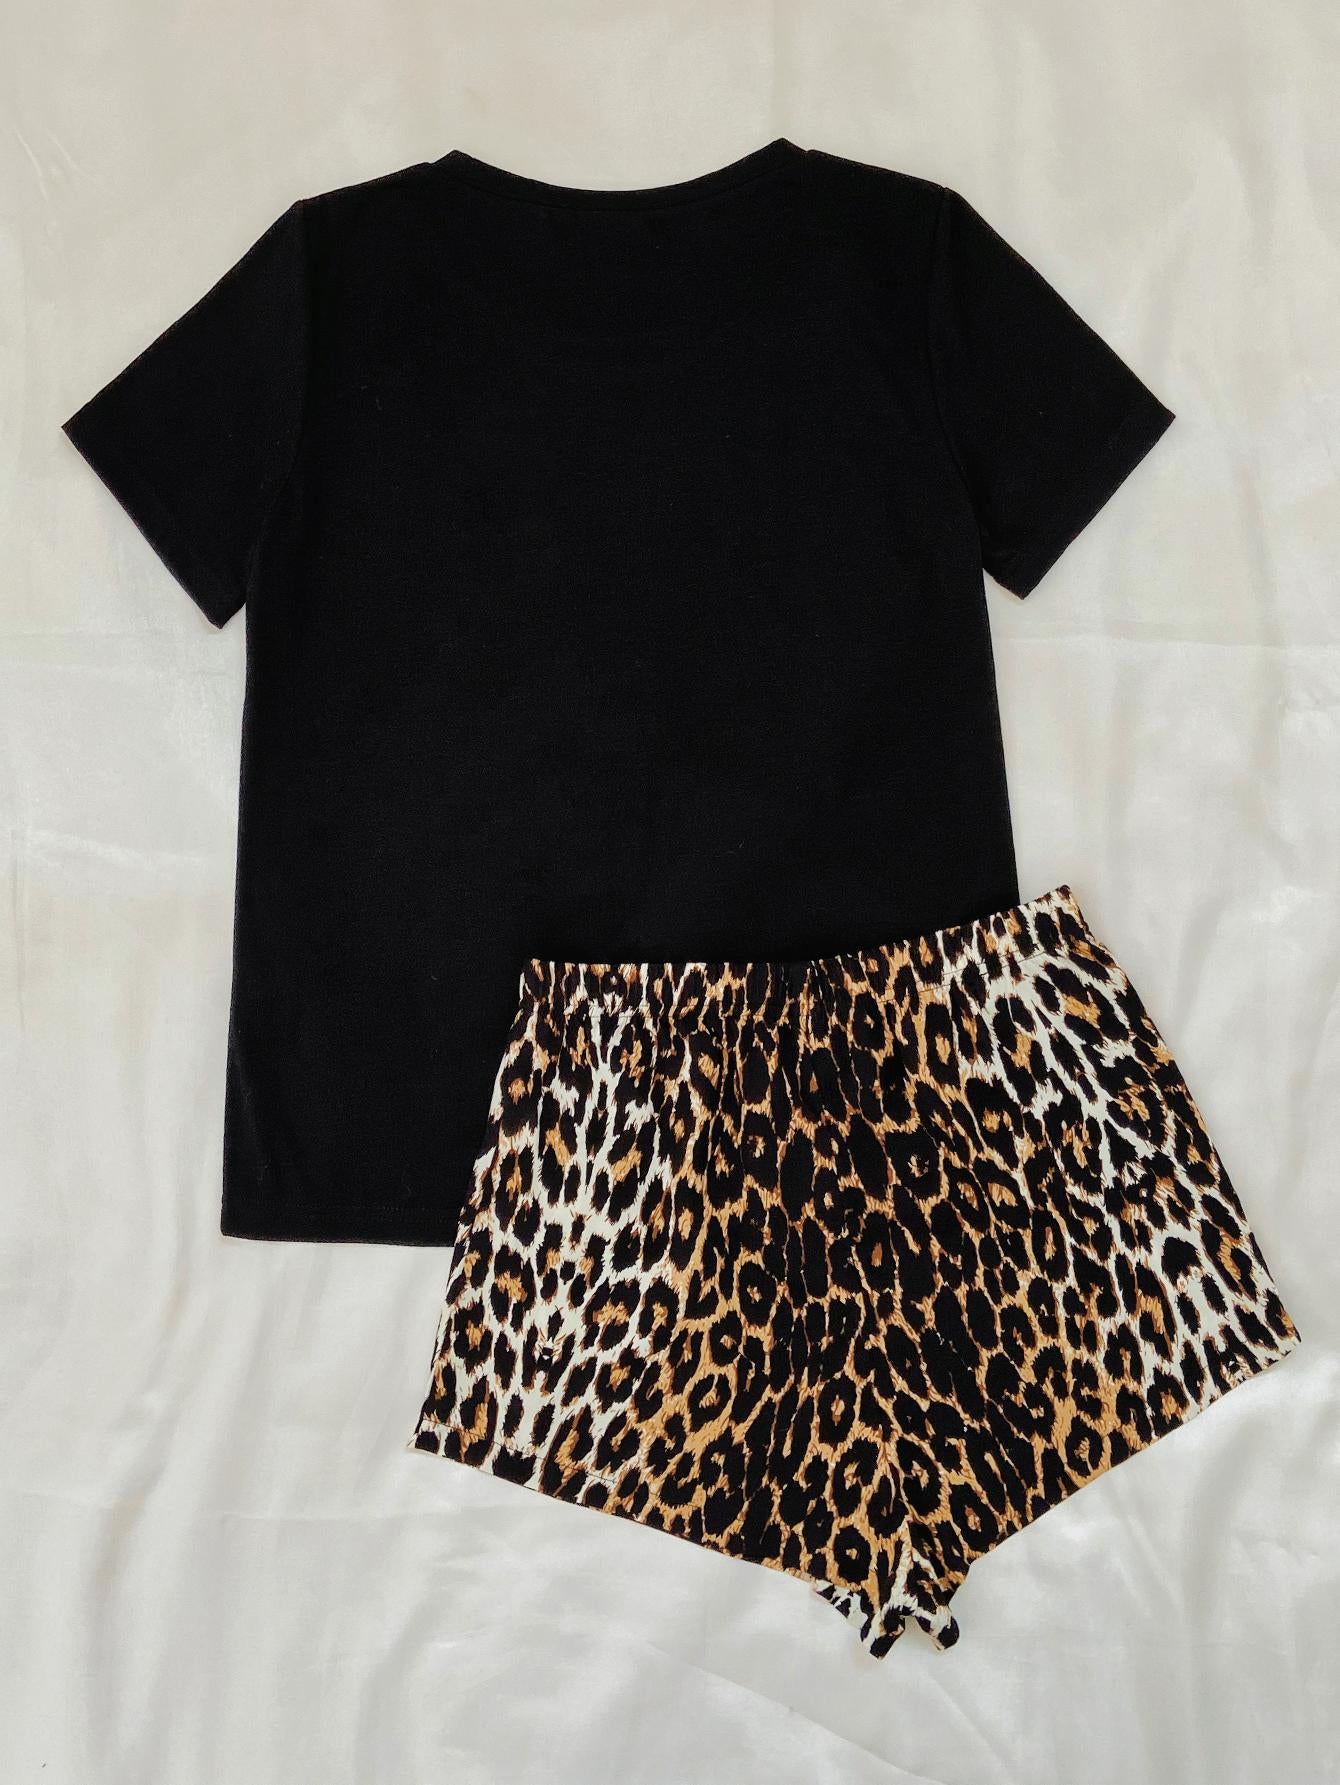 Leopard Lip Graphic Top and Shorts Lounge Set - Tophatter Deals and Online Shopping - Electronics, Jewelry, Beauty, Health, Gadgets, Fashion - Tophatter's Discounts & Offers - tophatters